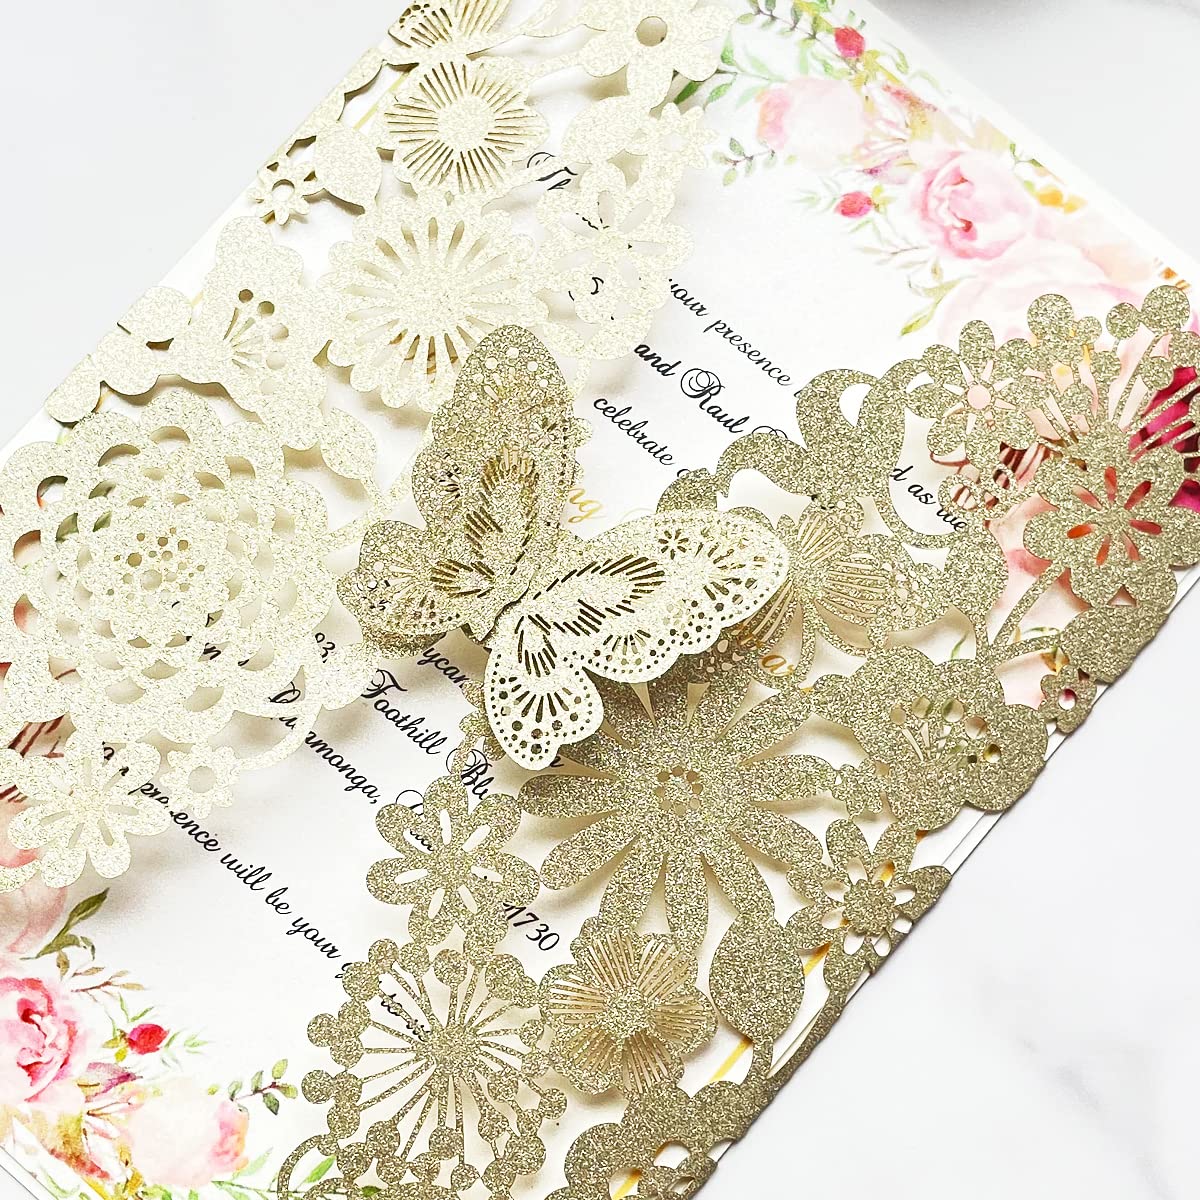 Hosmsua 5''x7.3'' 50pcs Champagne Laser Cut Flora Wedding Invitation Cards with Butterfly and Envelopes for Quinceañera Bridal Shower Wedding invite (Champagne Glitter) light gold